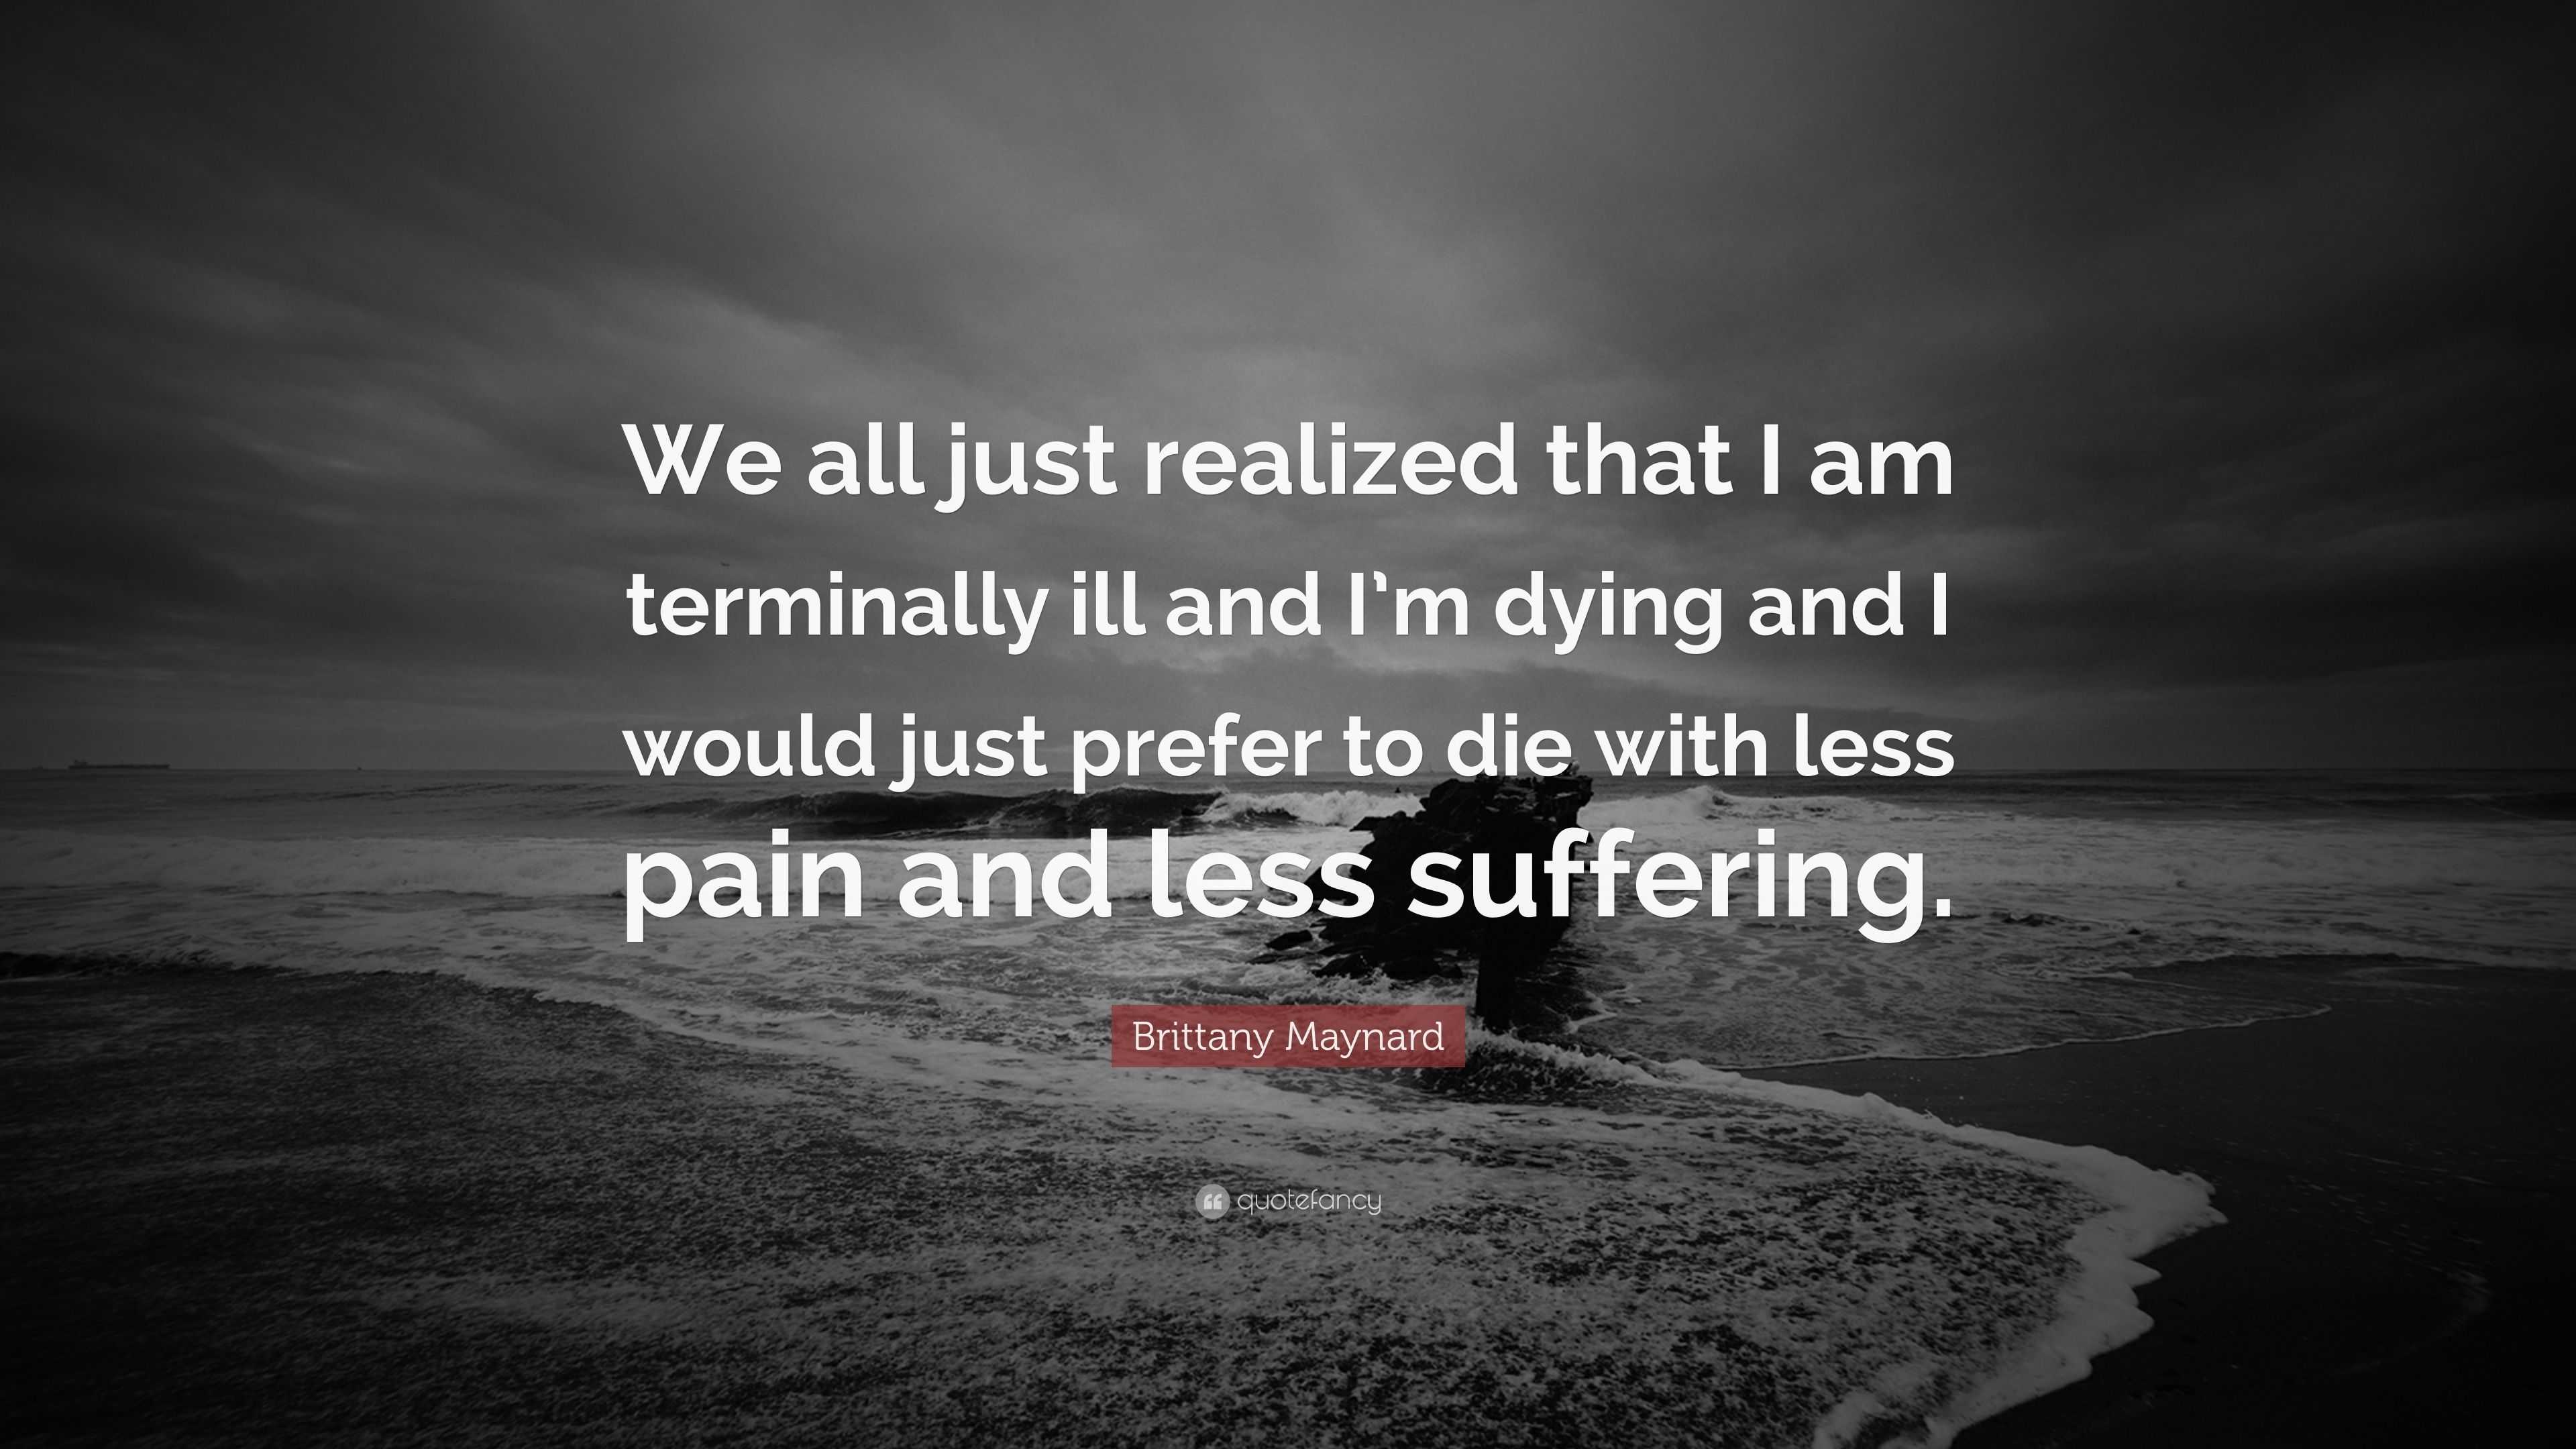 quotes and verse for the terminal illness